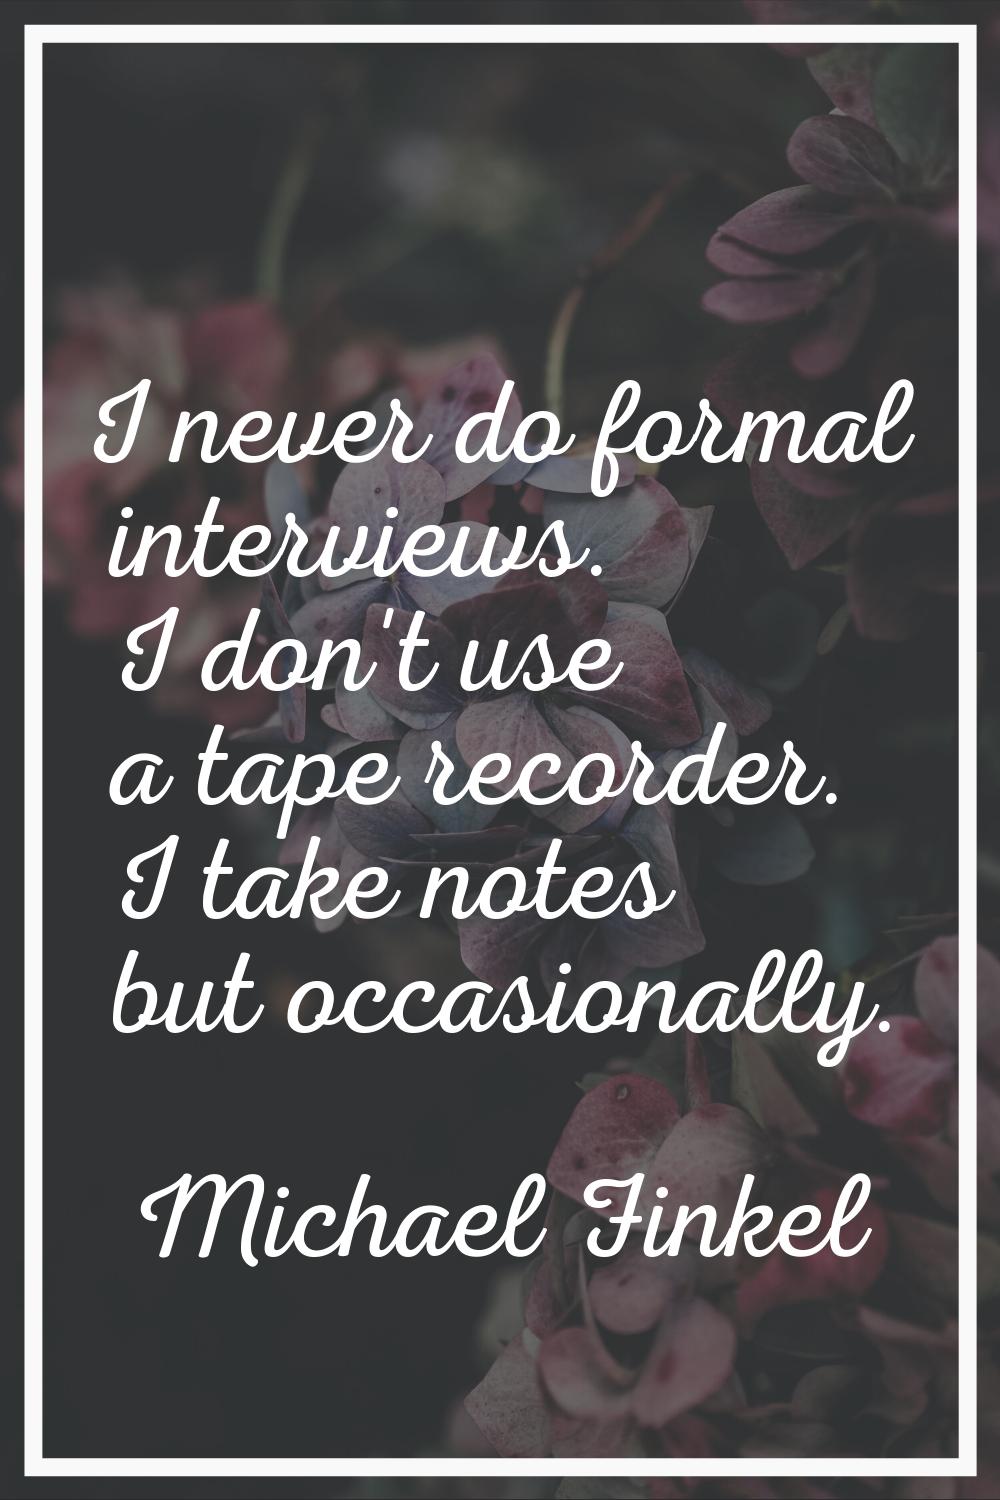 I never do formal interviews. I don't use a tape recorder. I take notes but occasionally.